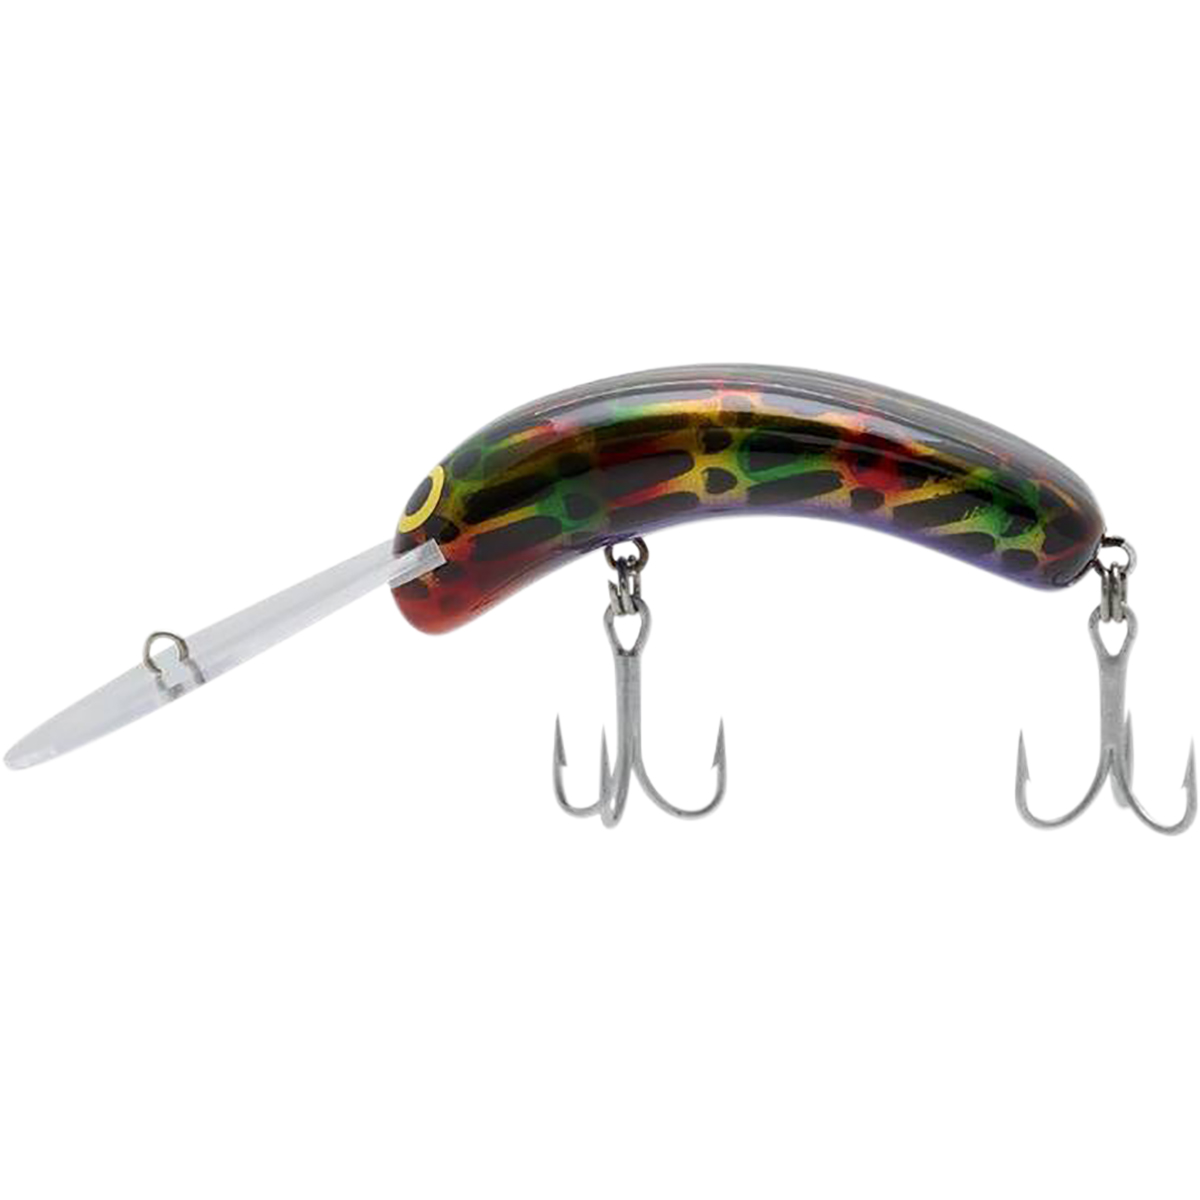 Australian Crafted Lures Invader Hard Body Lure 90mm Colour 49